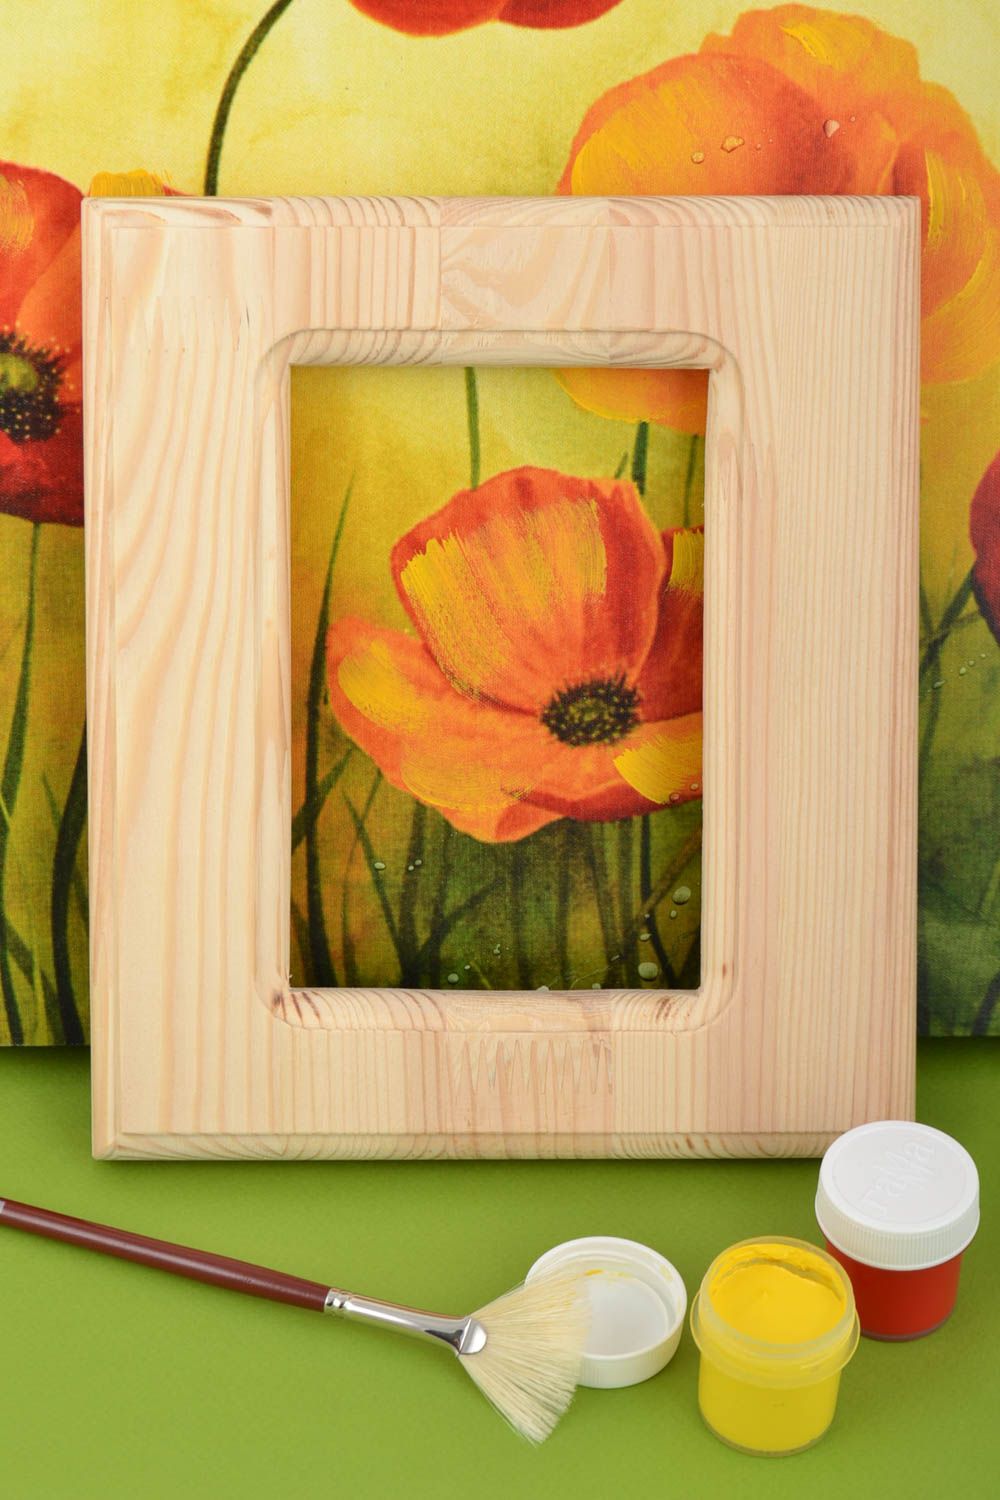 Handmade wooden laconic photo frame craft blank for decoupage and painting photo 1